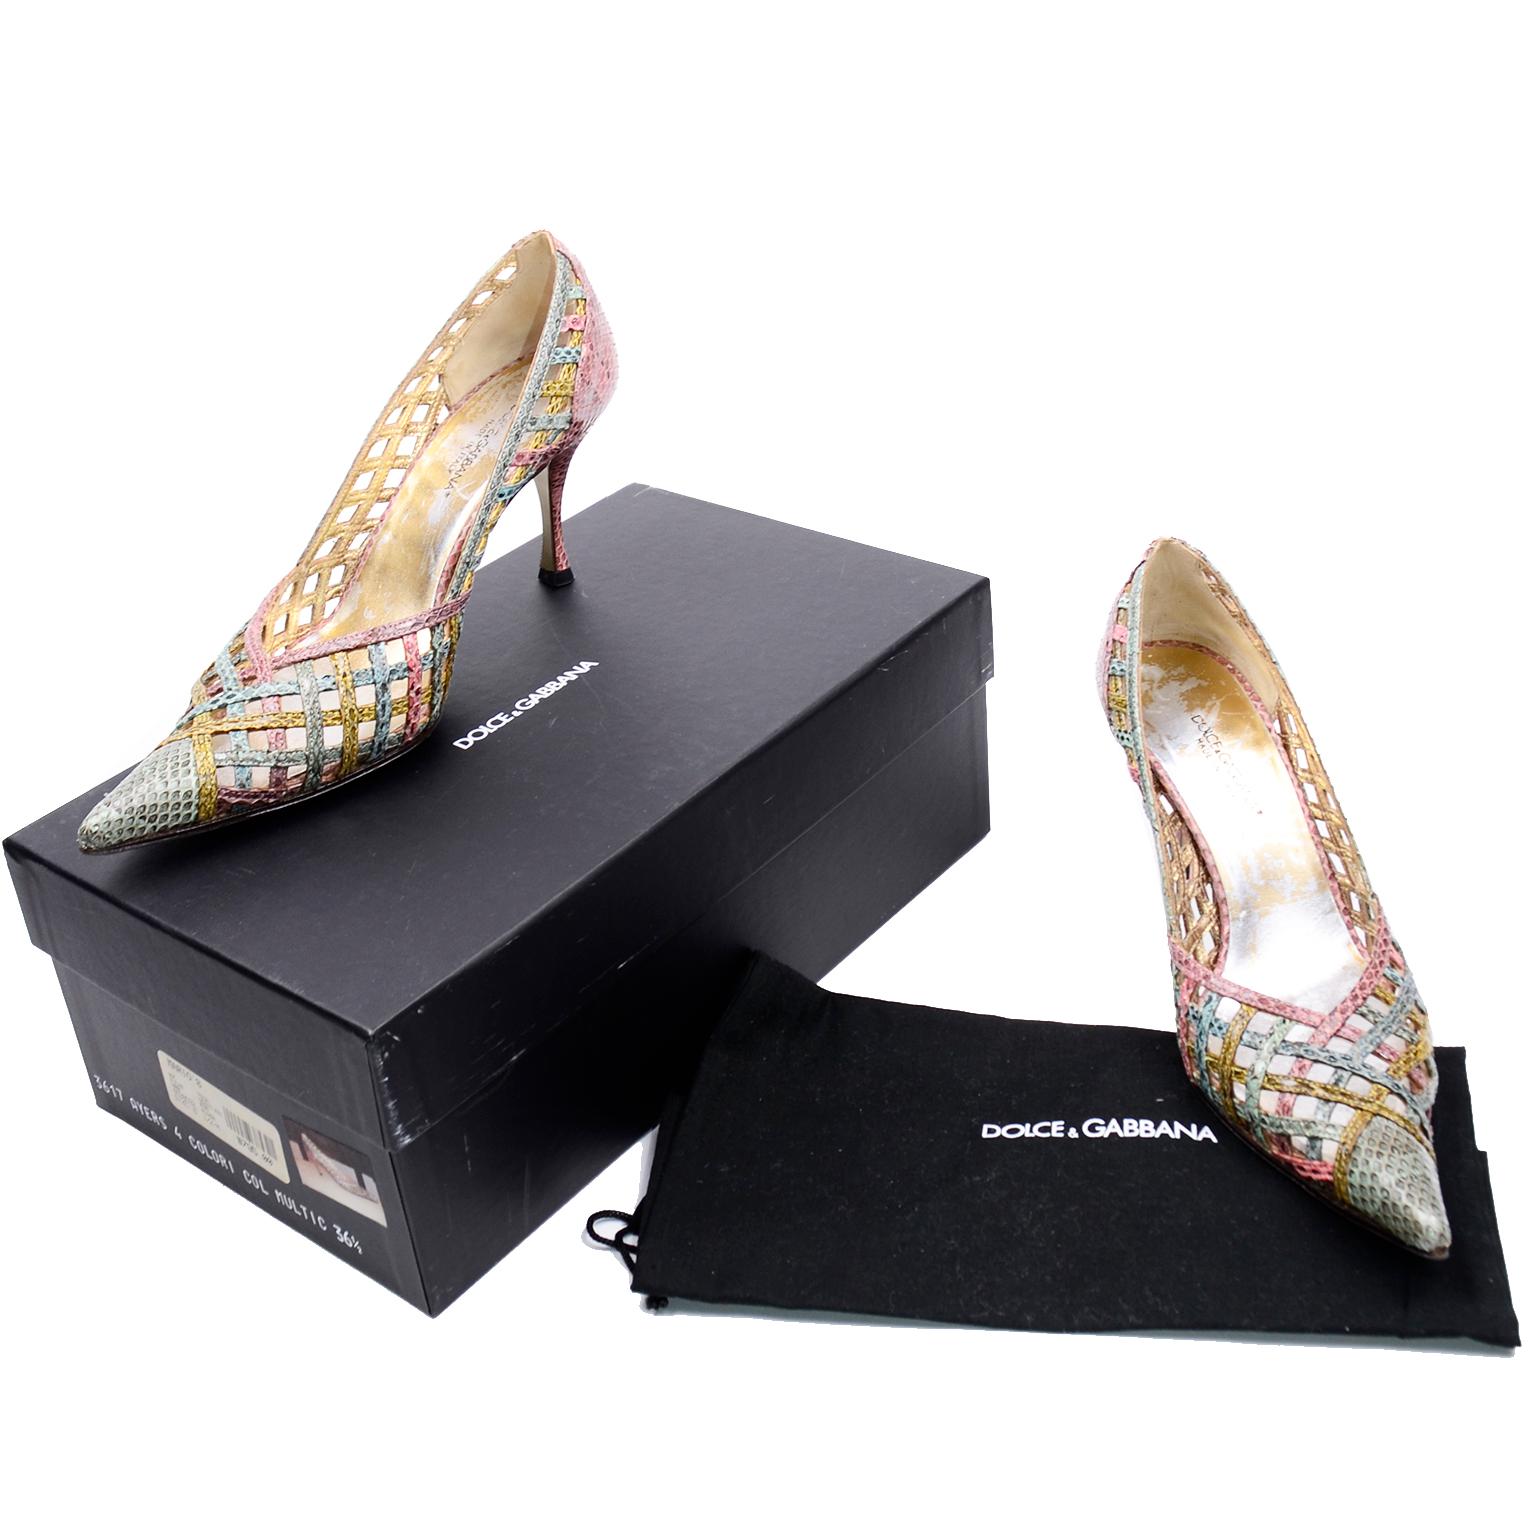 These Dolce & Gabbana pointed toe shoes are beautifully woven with multi color snakeskin in shades of pink, purple, green and blue. These stunning pumps come with their original box with tags and their original dust bag. The shoes have leather soles